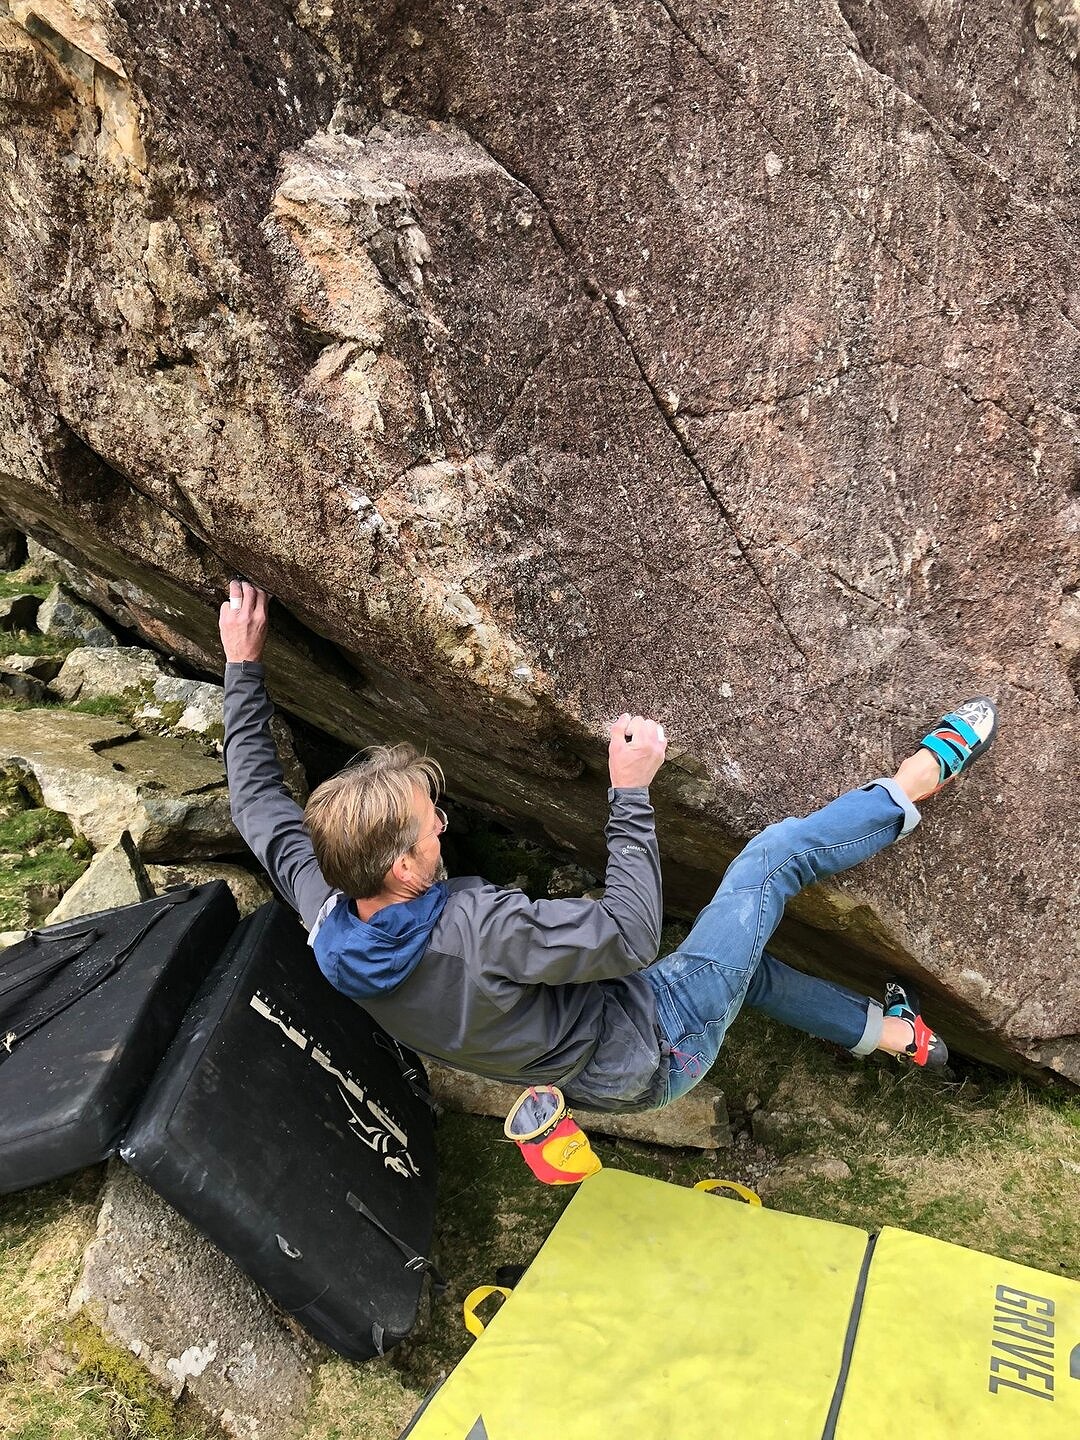 Andy Mitchell on Pulsar Eskdale   © piken